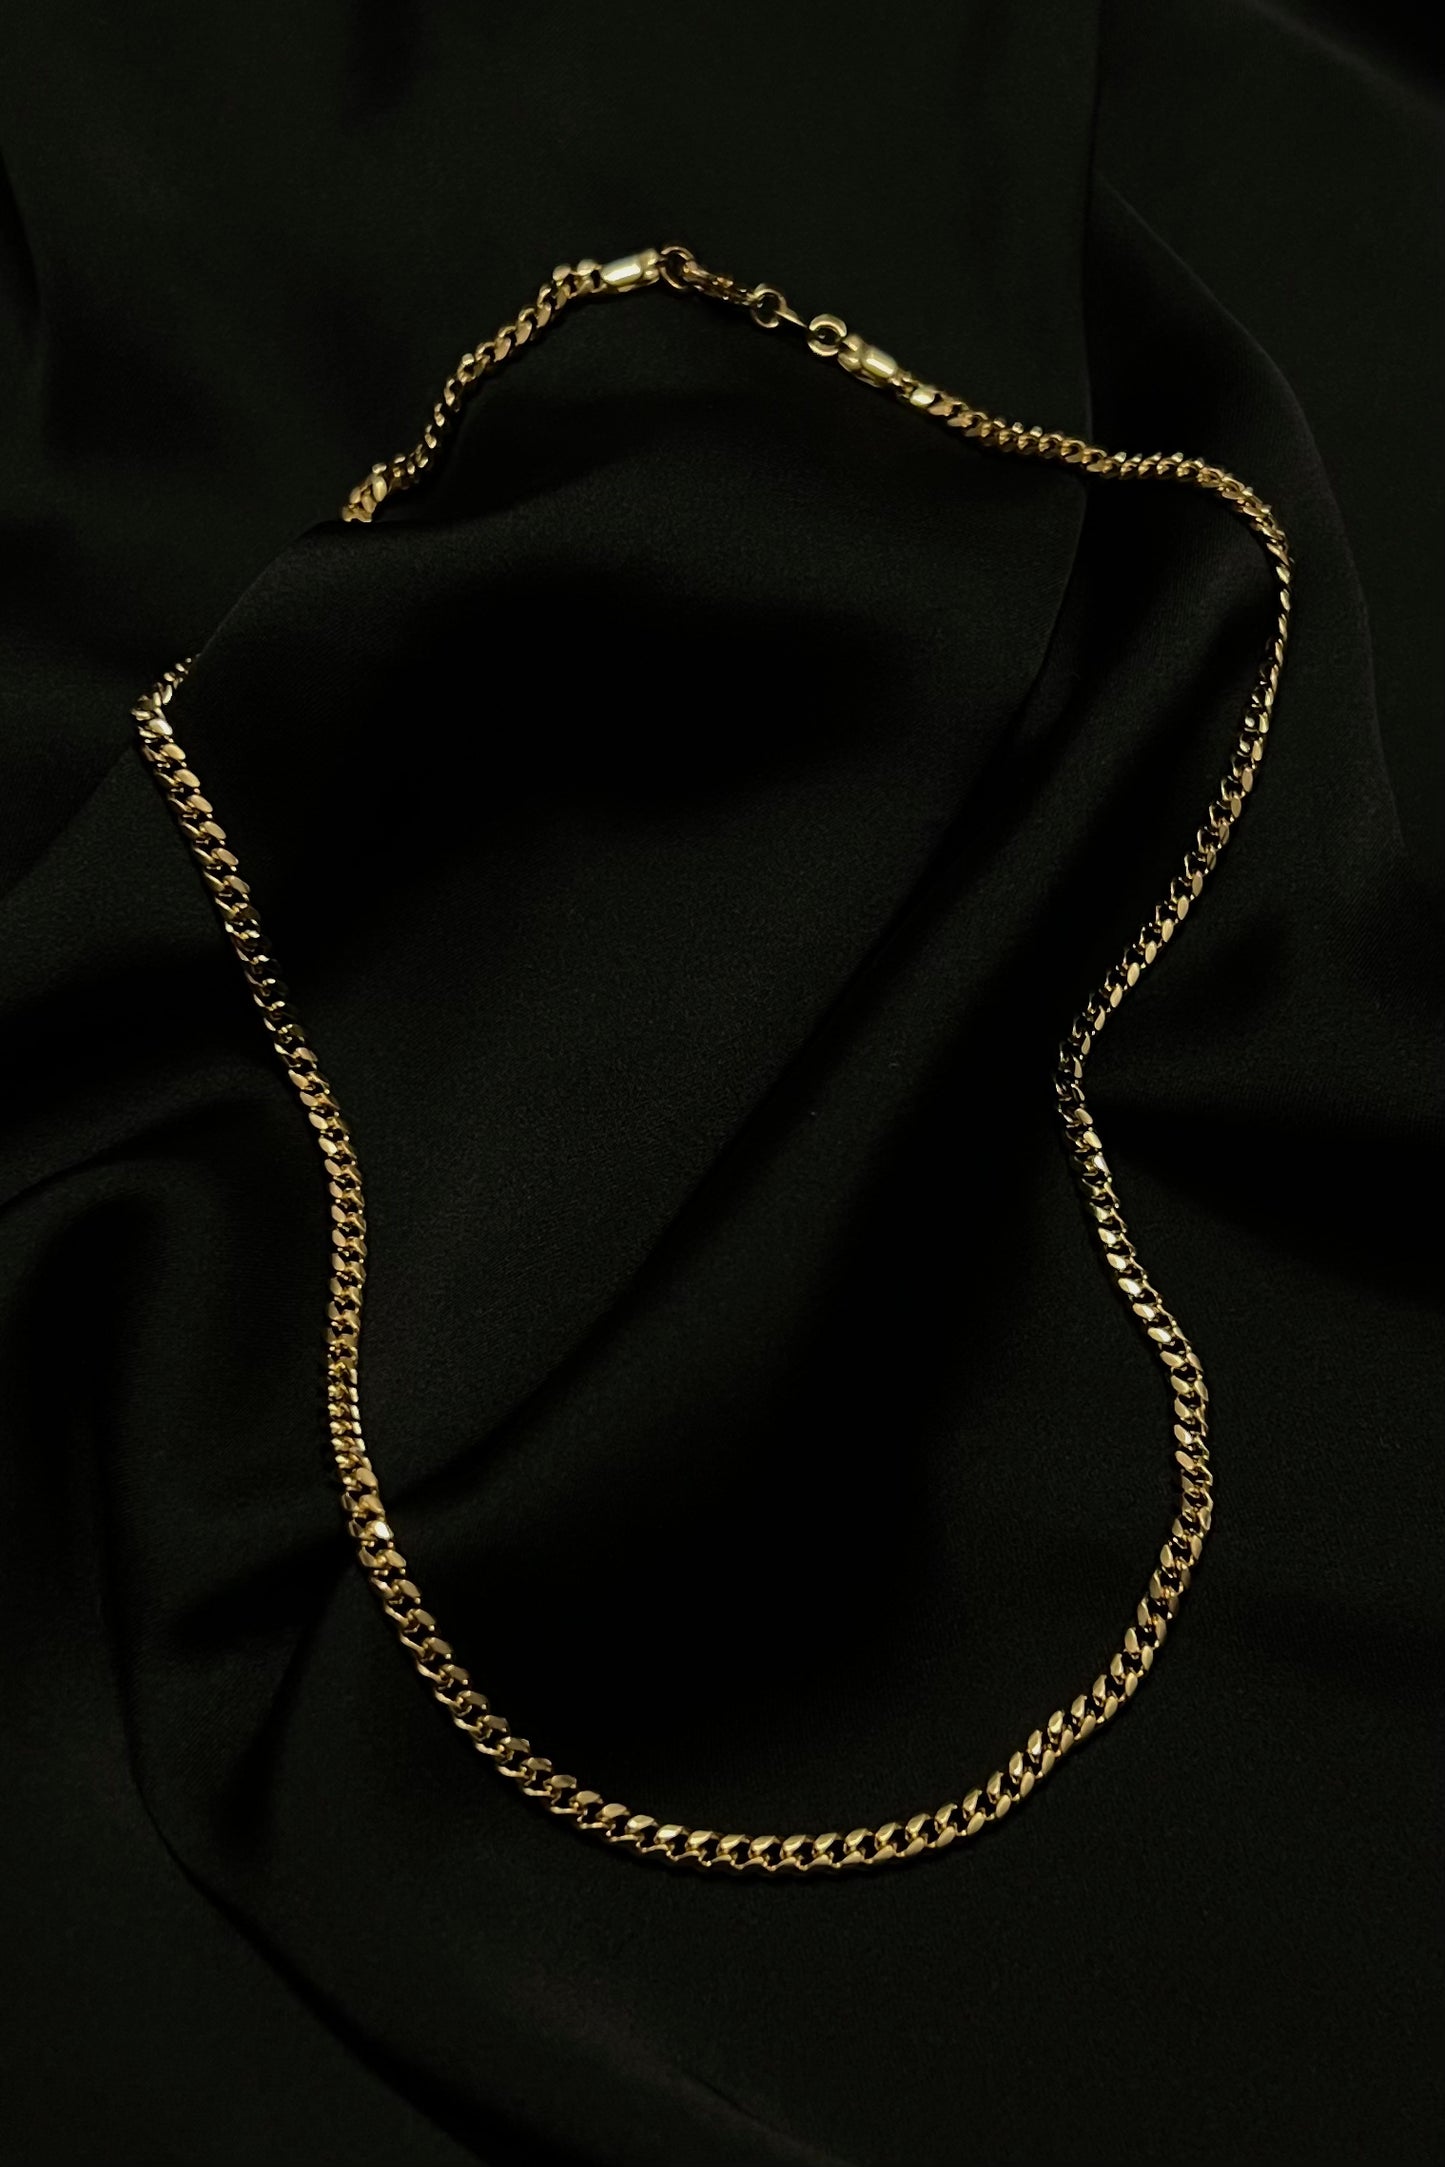 Cuban chain necklace showcased on a luxurious black fabric background. The necklace features interlocking, tightly-woven links.